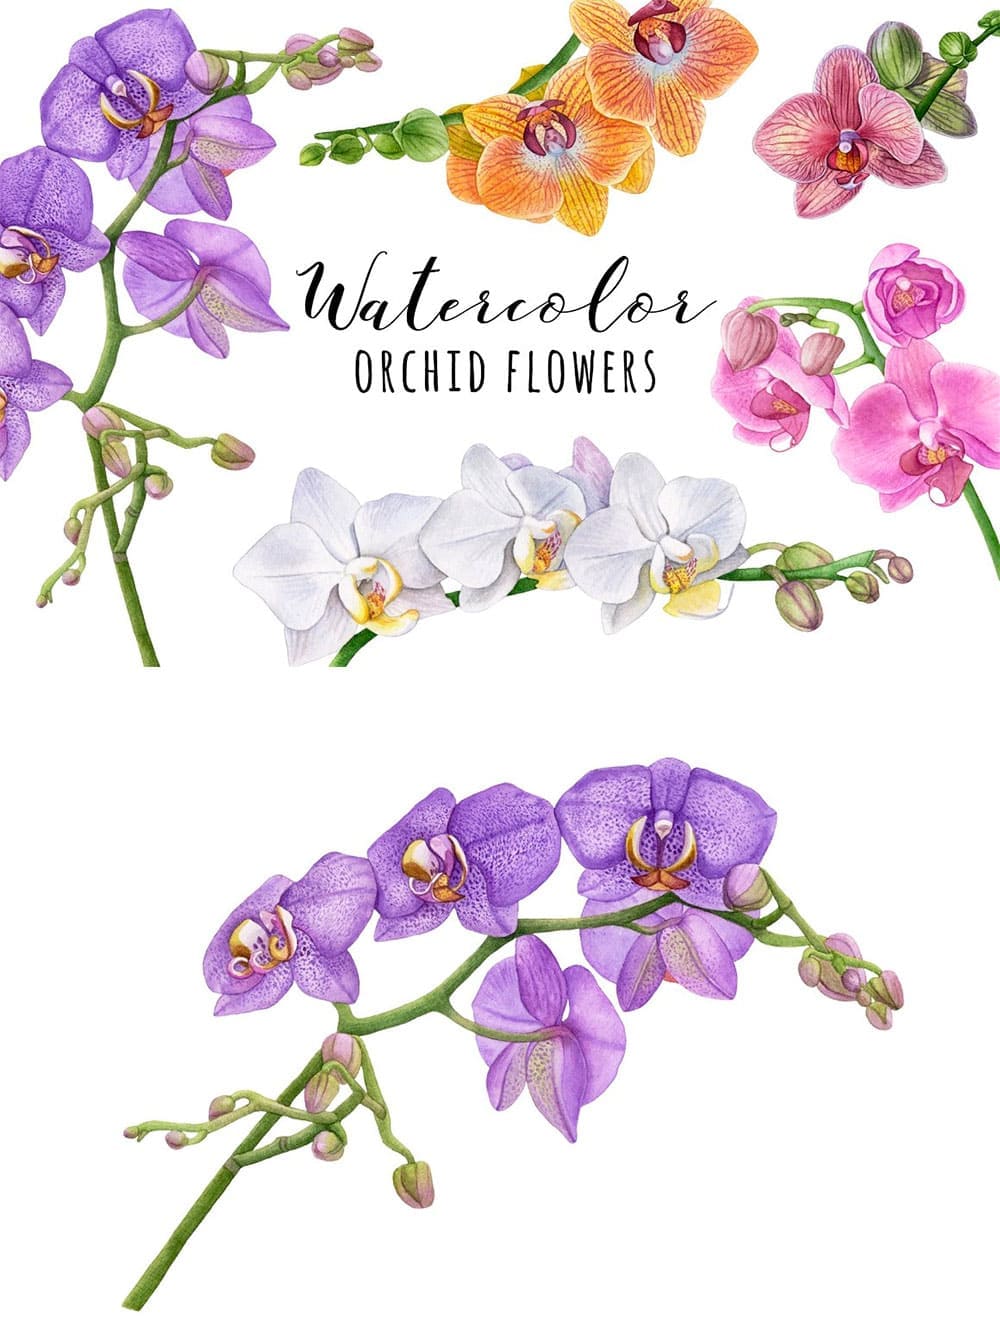 Watercolor orchid flowers, picture for pinterest.